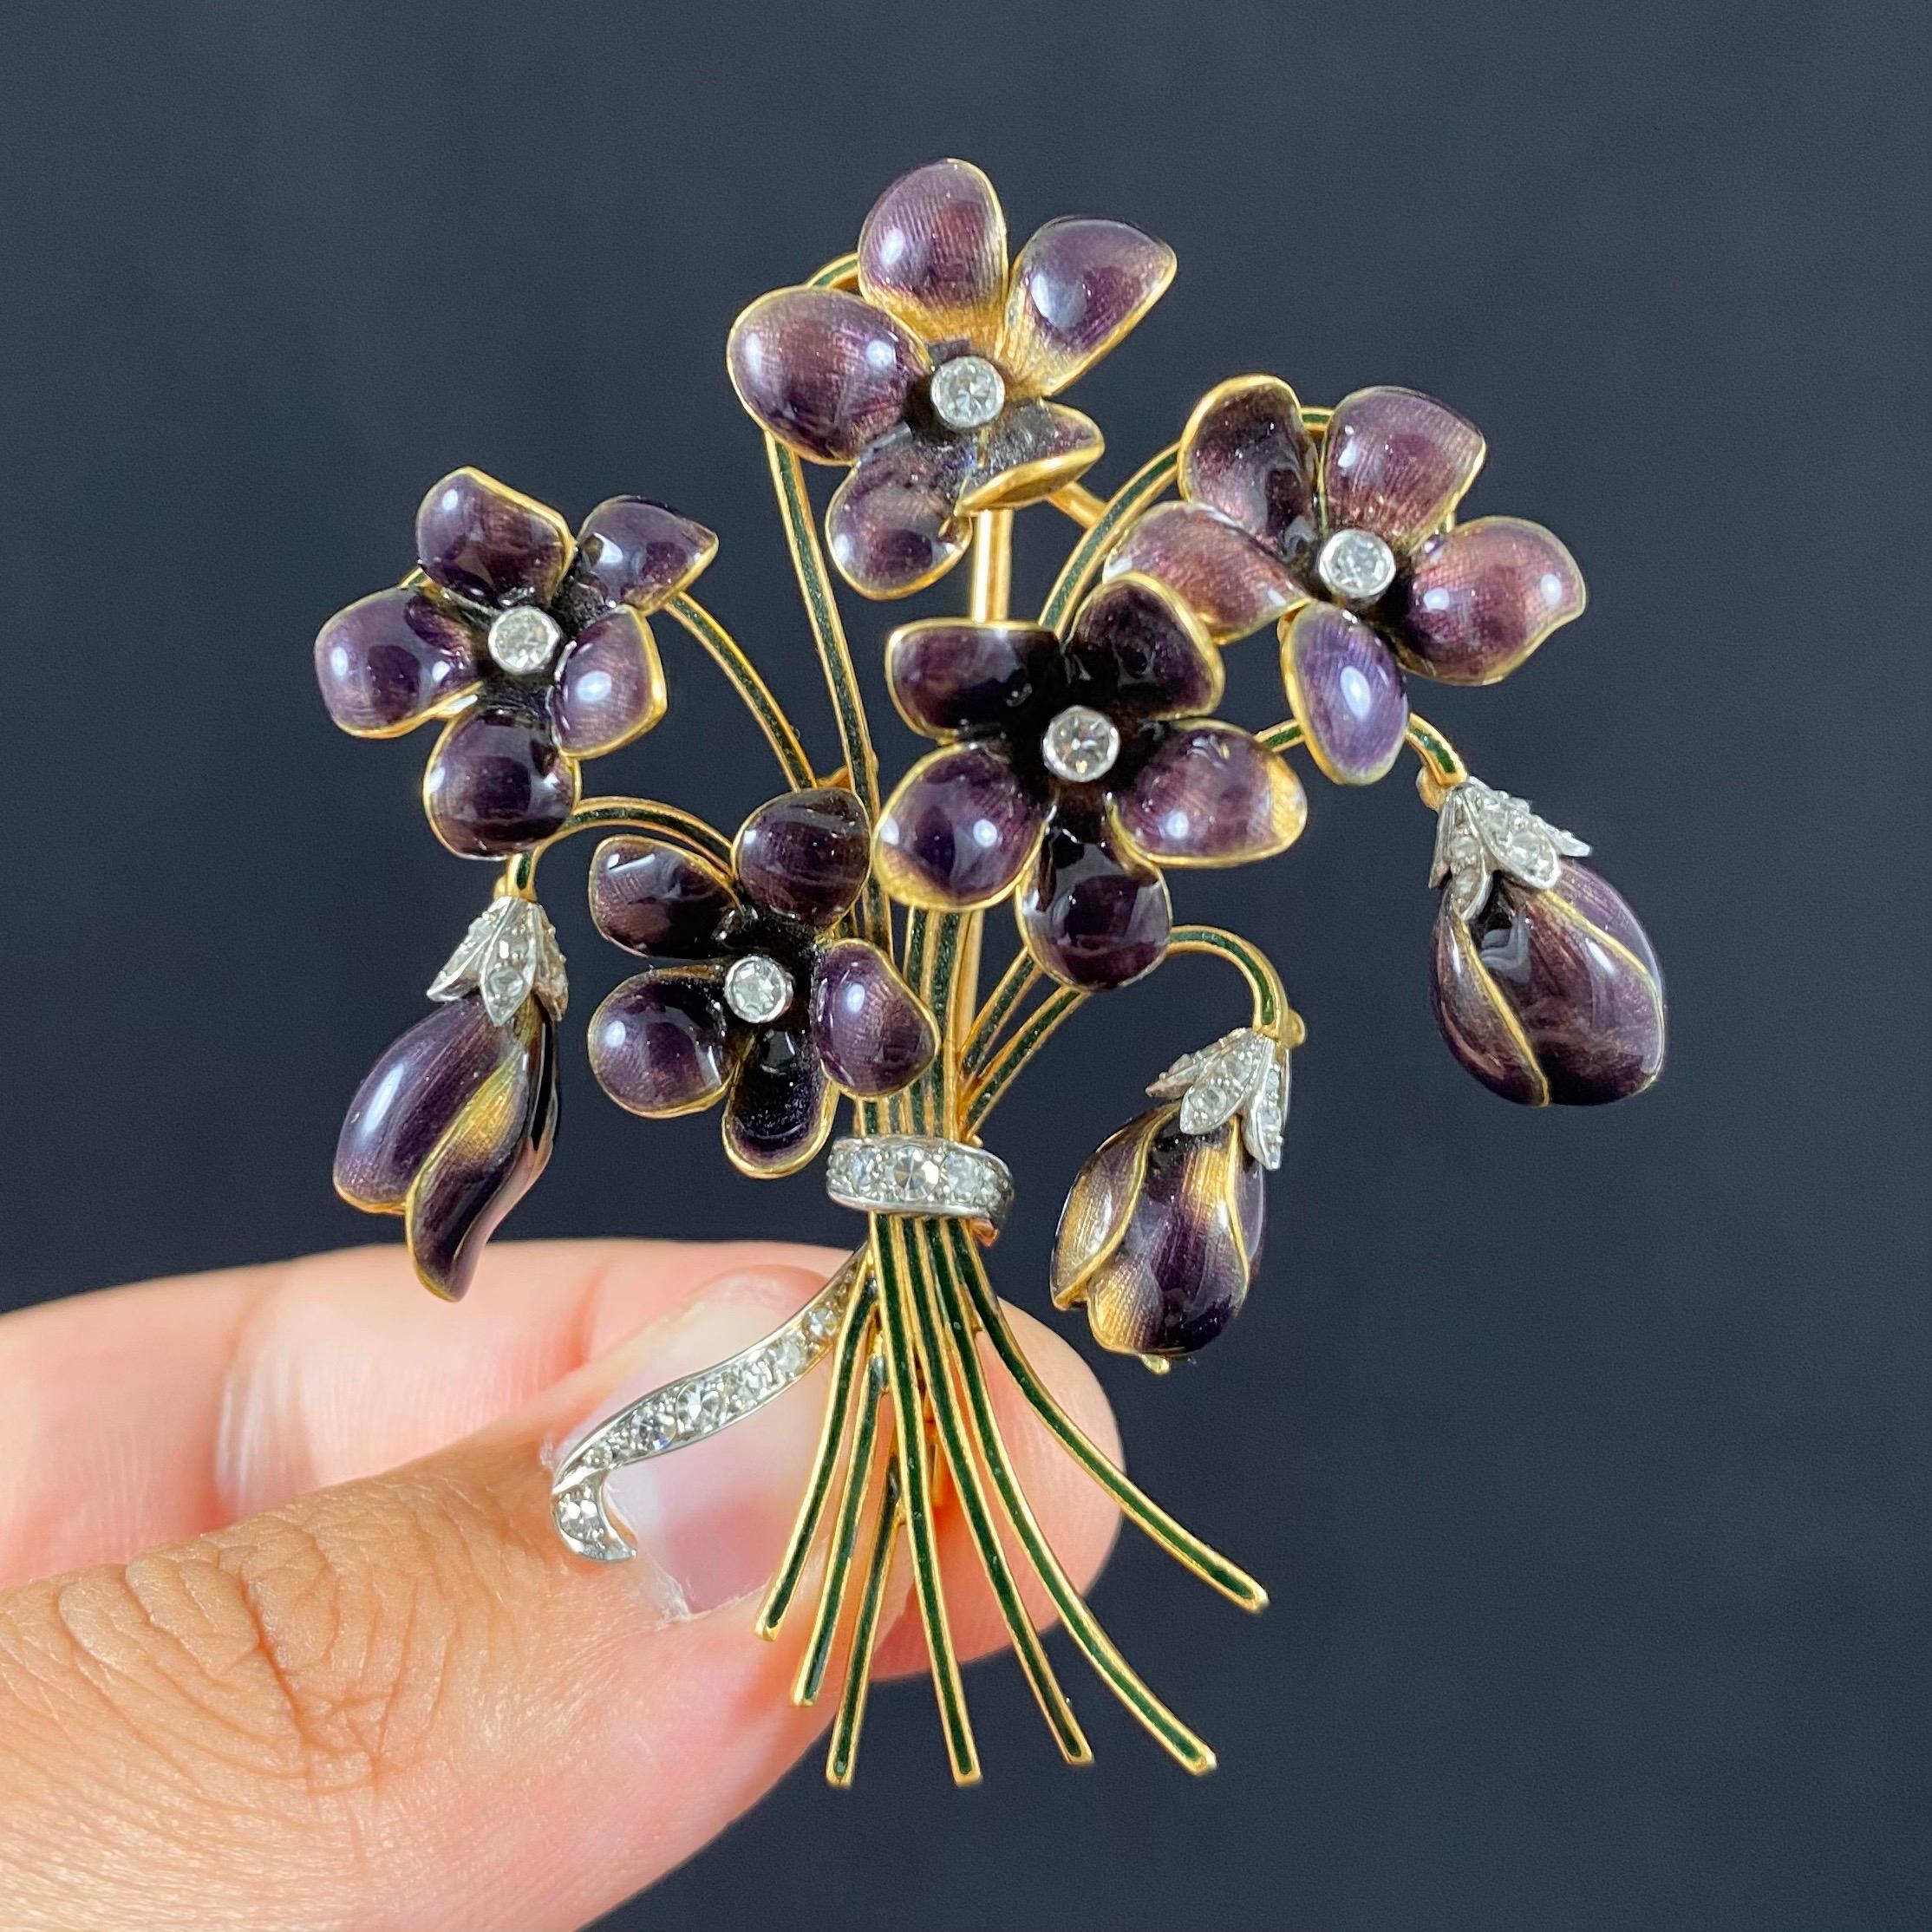 Retro diamond and polychrome enamel violet floral bouquet brooch in 19.2kt yellow gold and platinum, by Portuguese crown jeweler Leitão & Irmão, 1940s, accompanied by the maker’s case. This brooch is modelled as a bouquet of eight violets, each